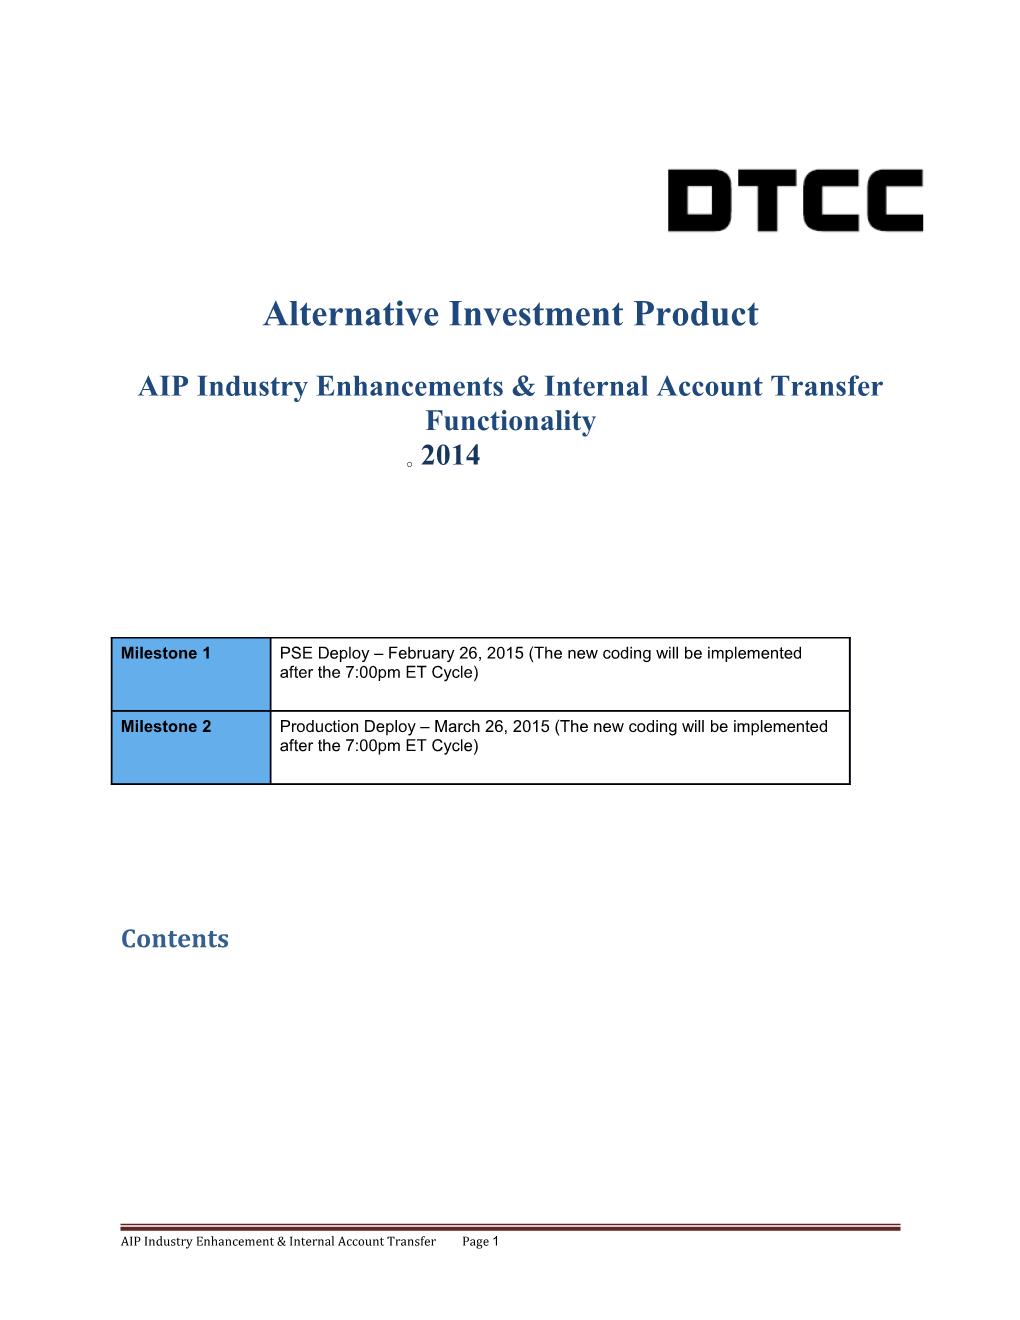 AIP Industry Enhancements & Internal Account Transfer Functionality